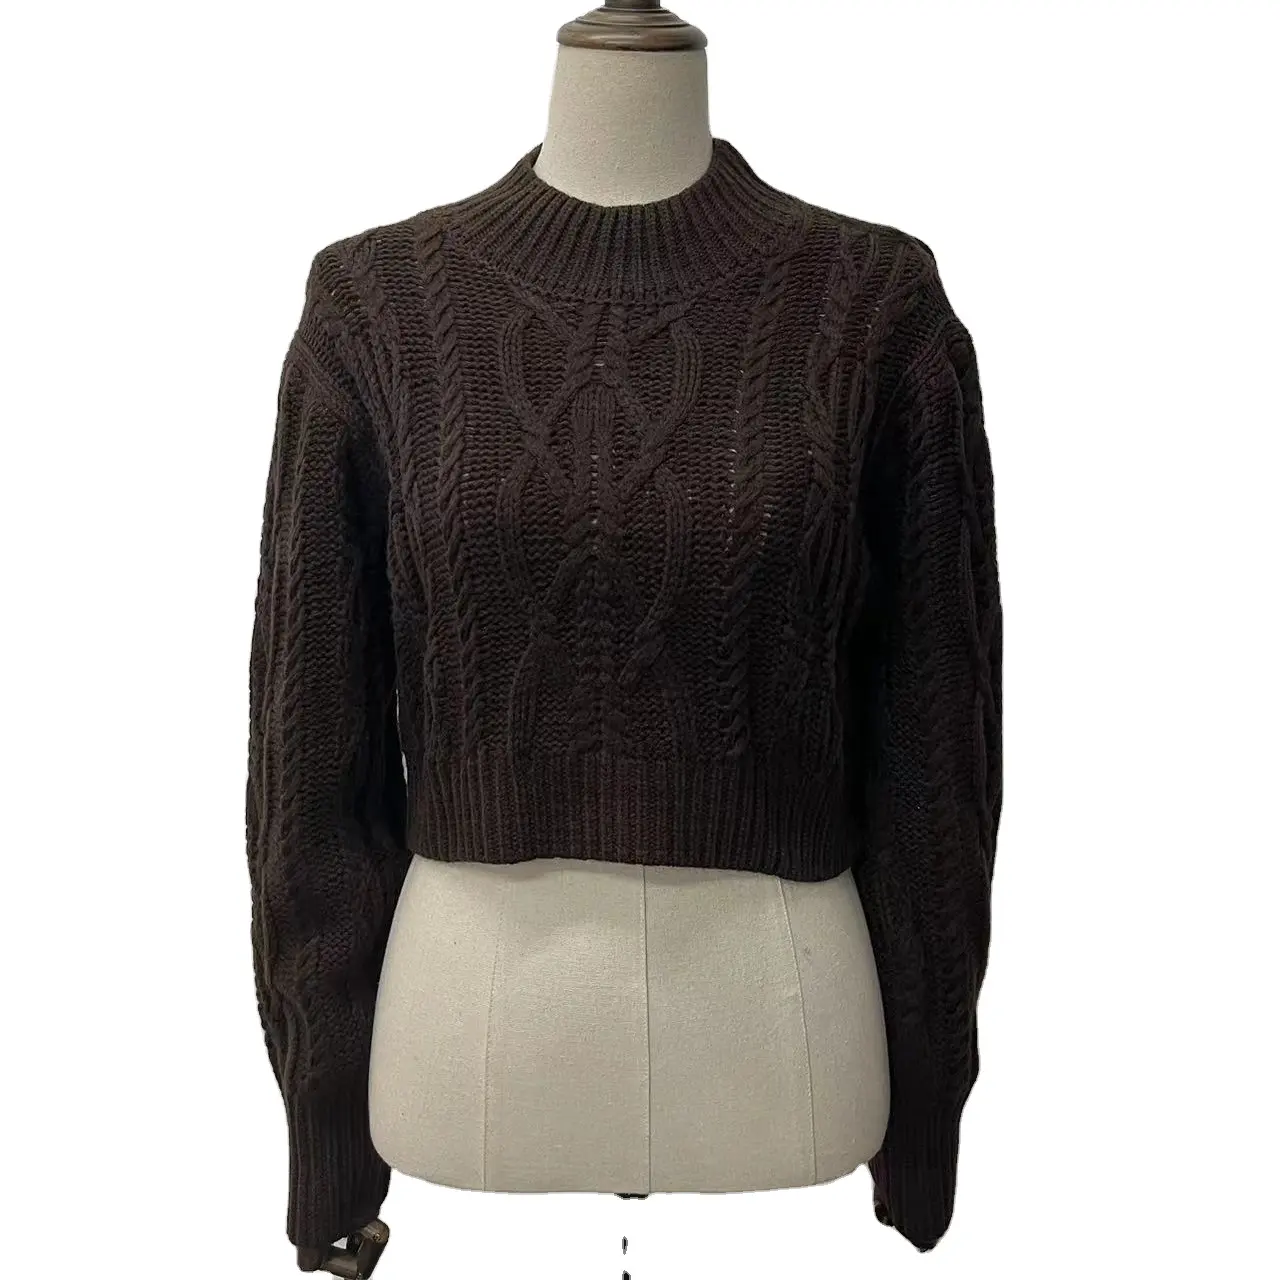 New style customize collar jumper short style crew neck knitted women's sweater